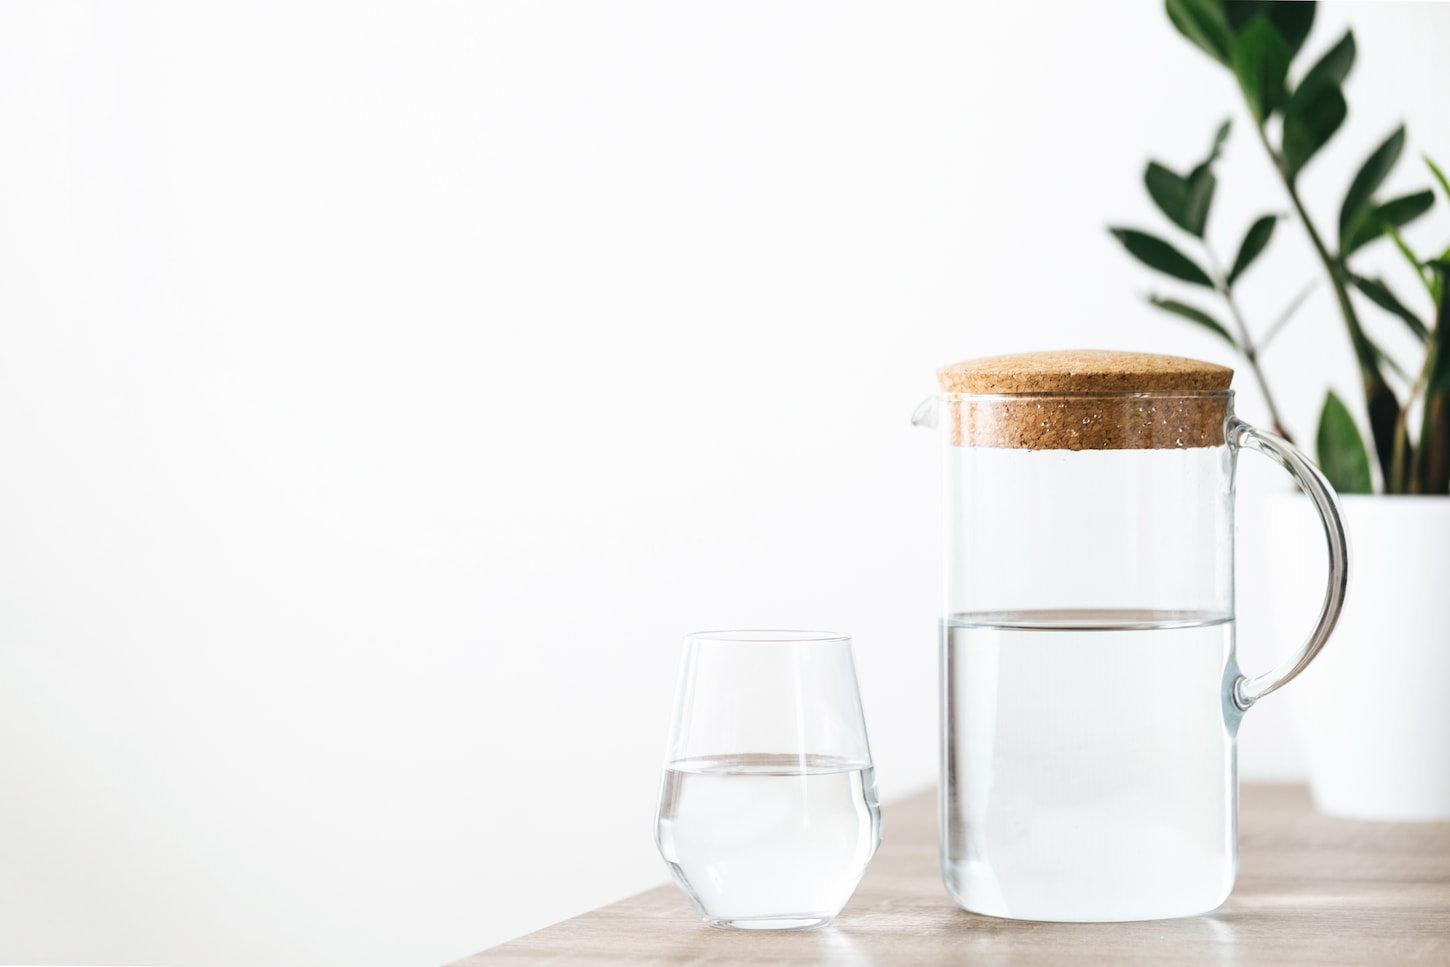 An image of a glass of water and jar on a white and clean background.